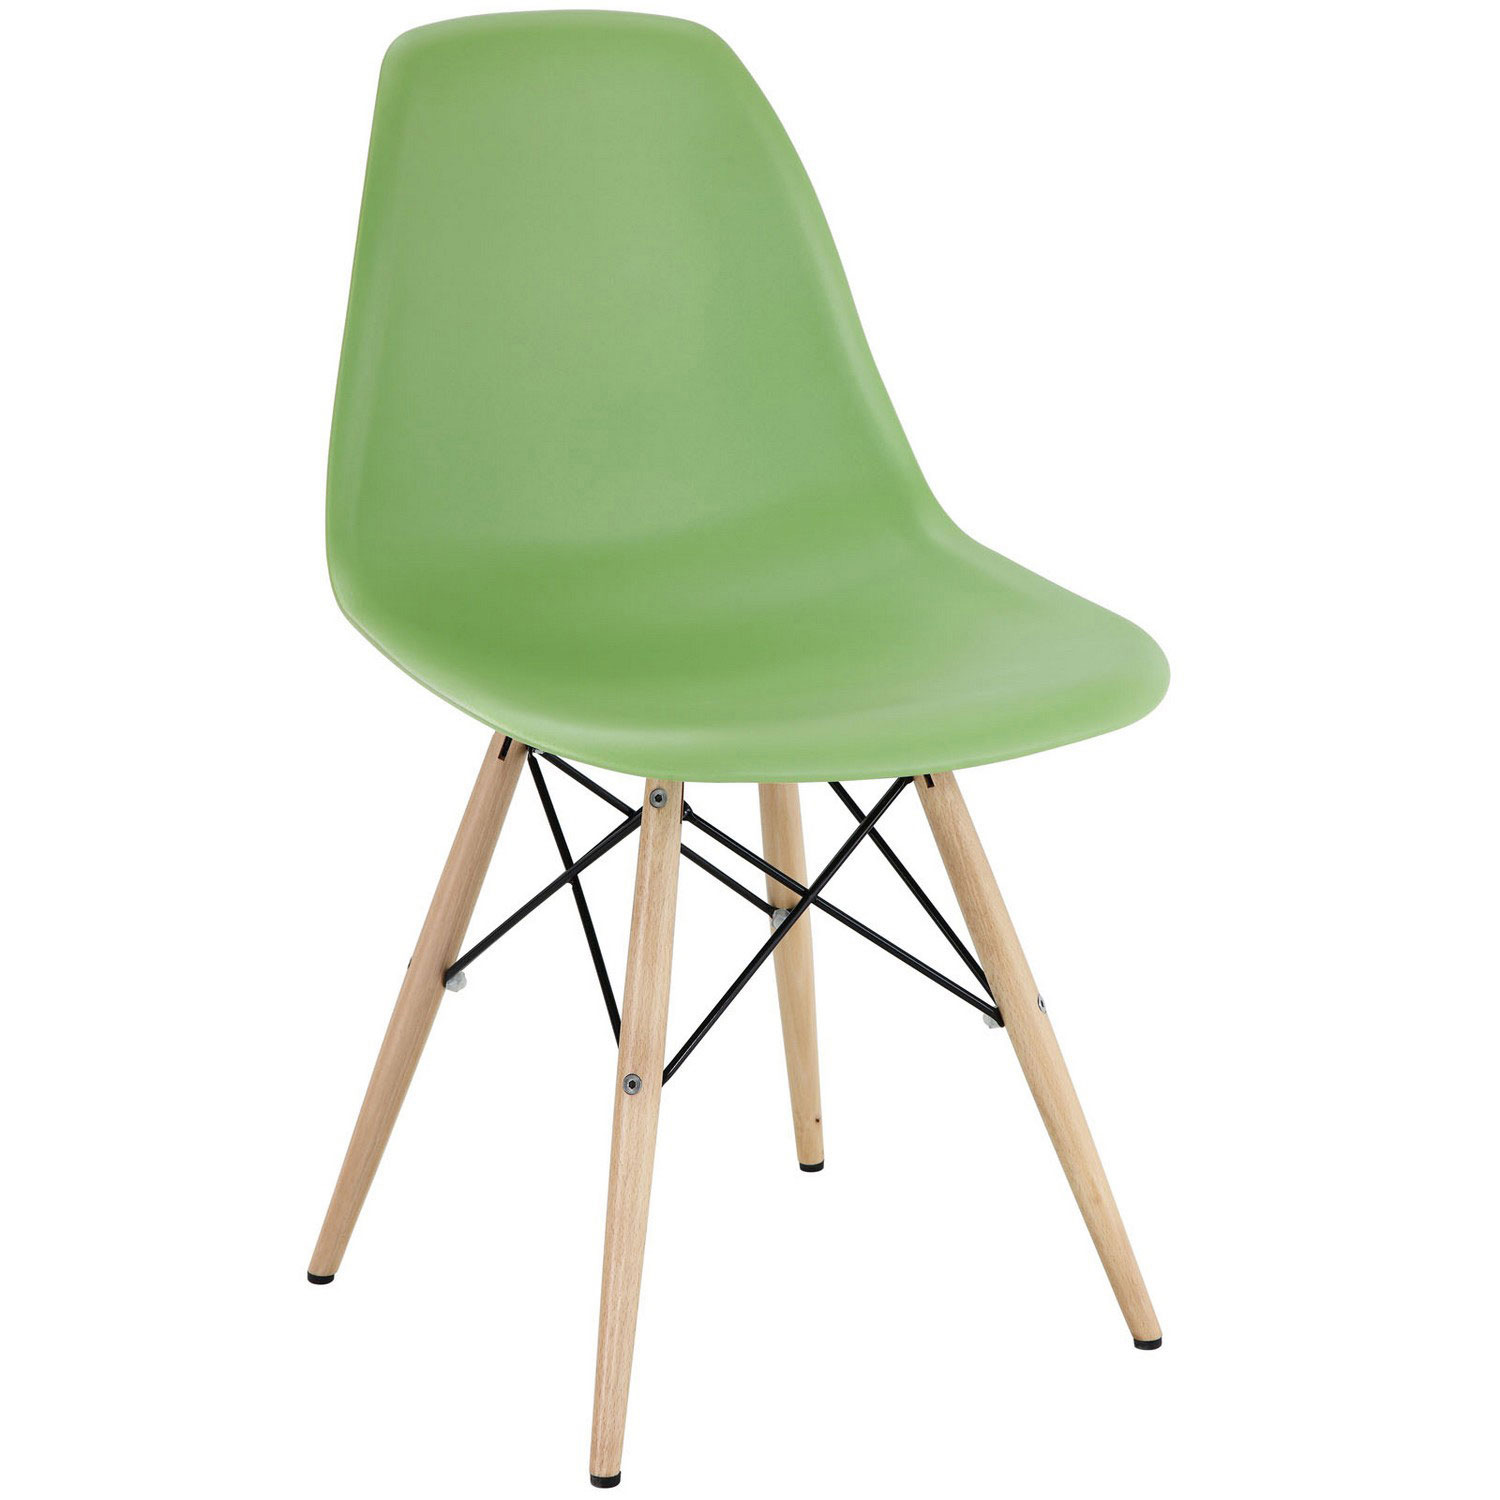 Modway Pyramid Dining Side Chair - Light Green